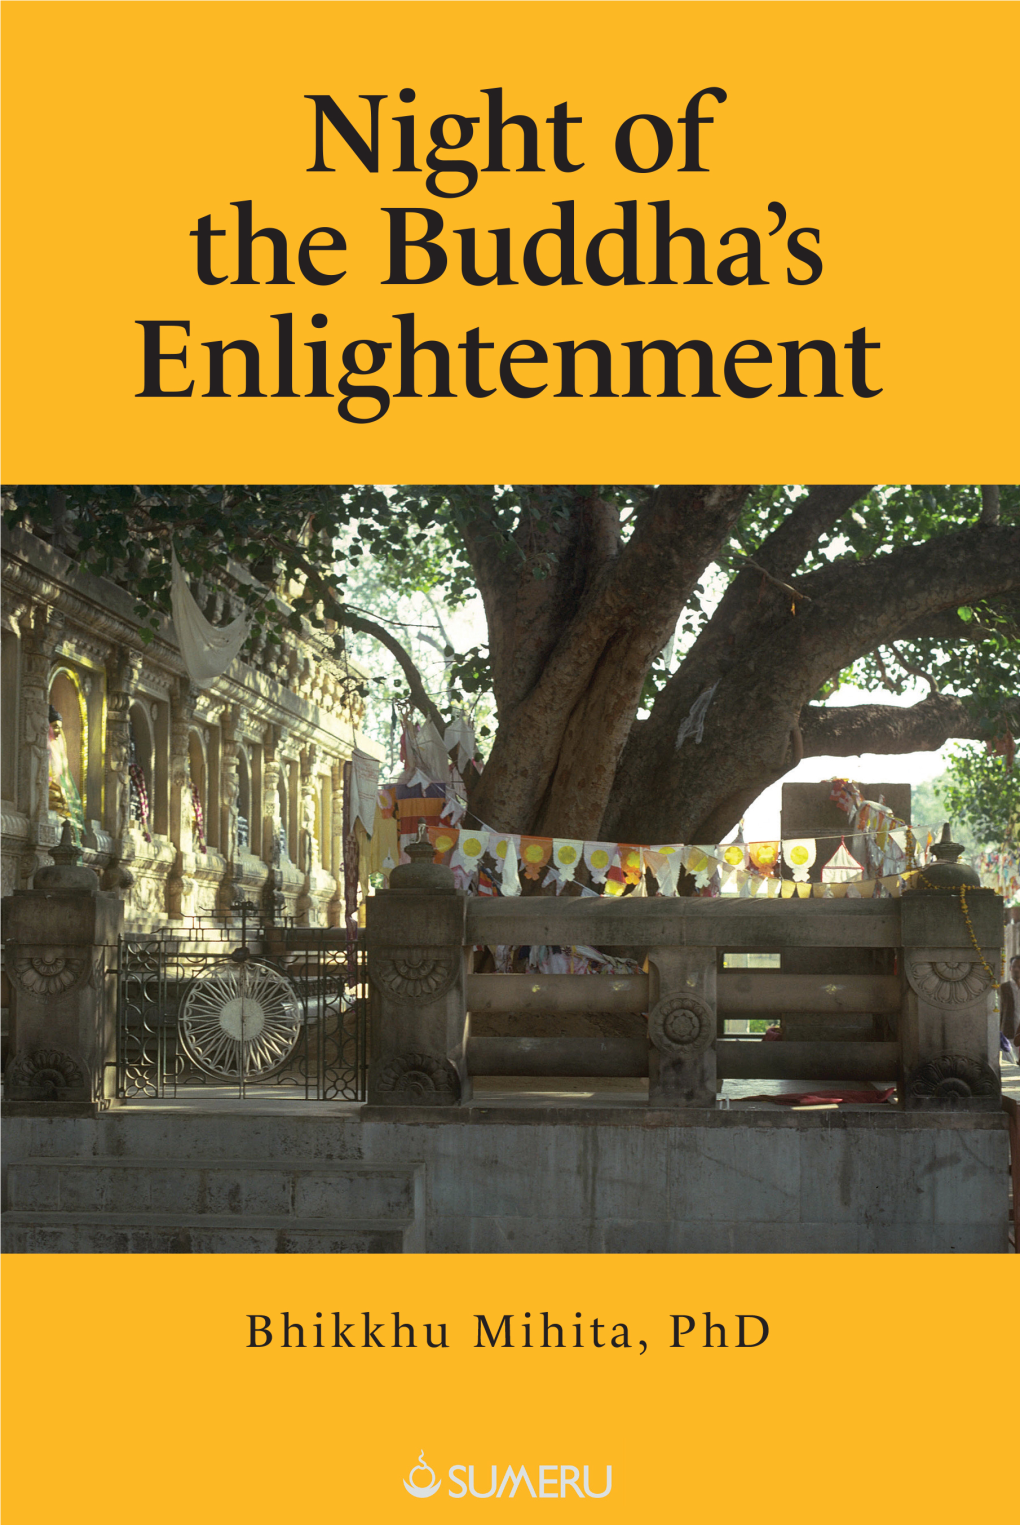 Night of the Buddha's Enlightenment